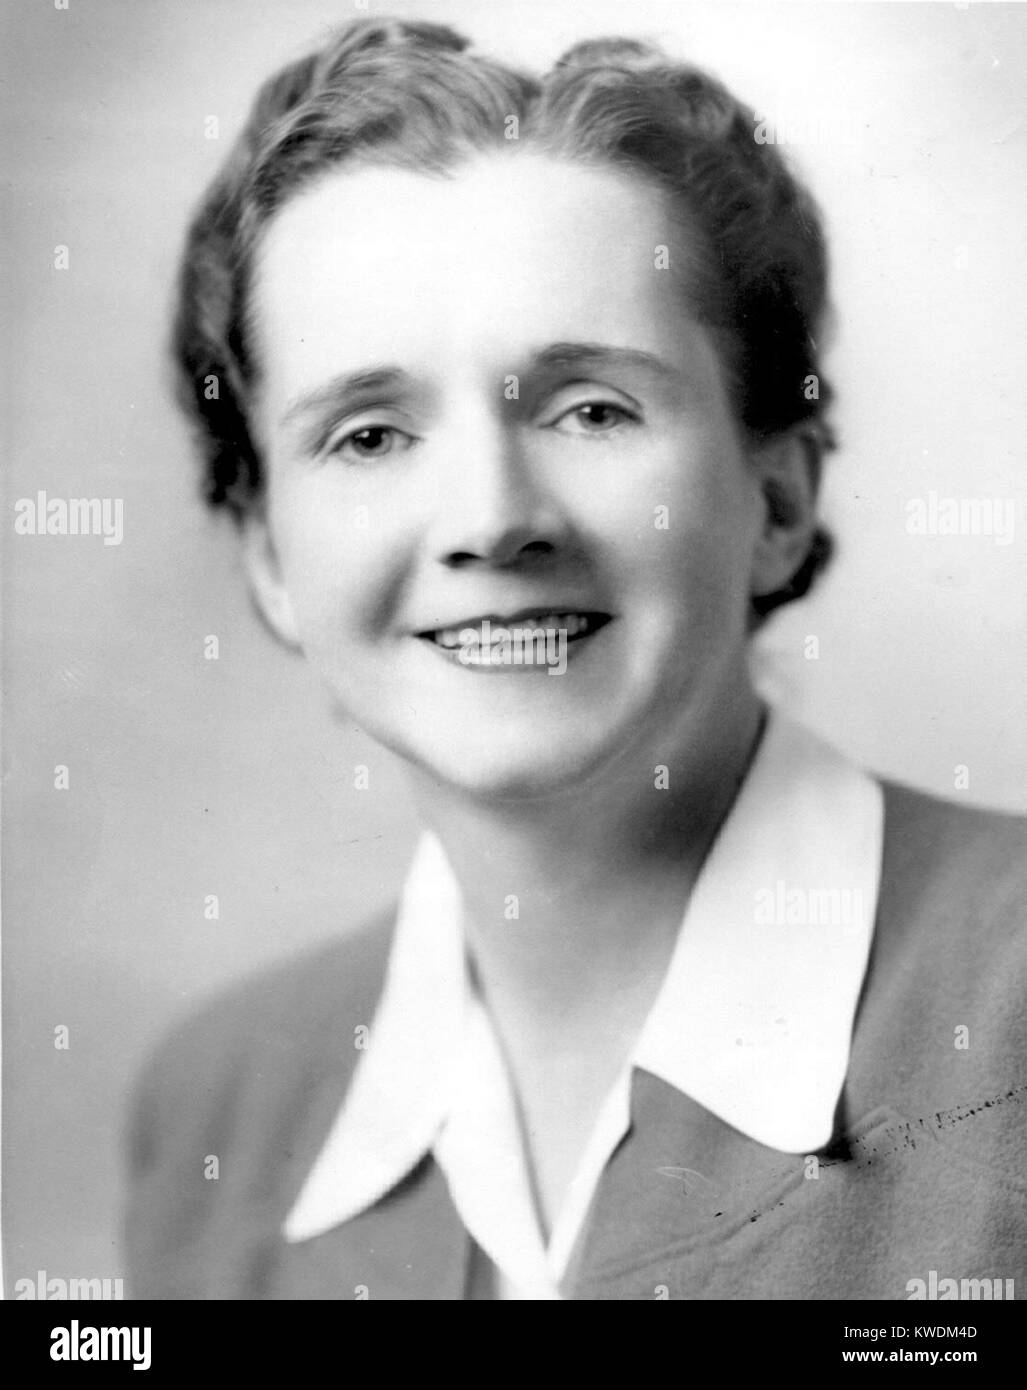 Rachel Carson, author of Silent Spring, American marine biologist, author, and conservationist Stock Photo